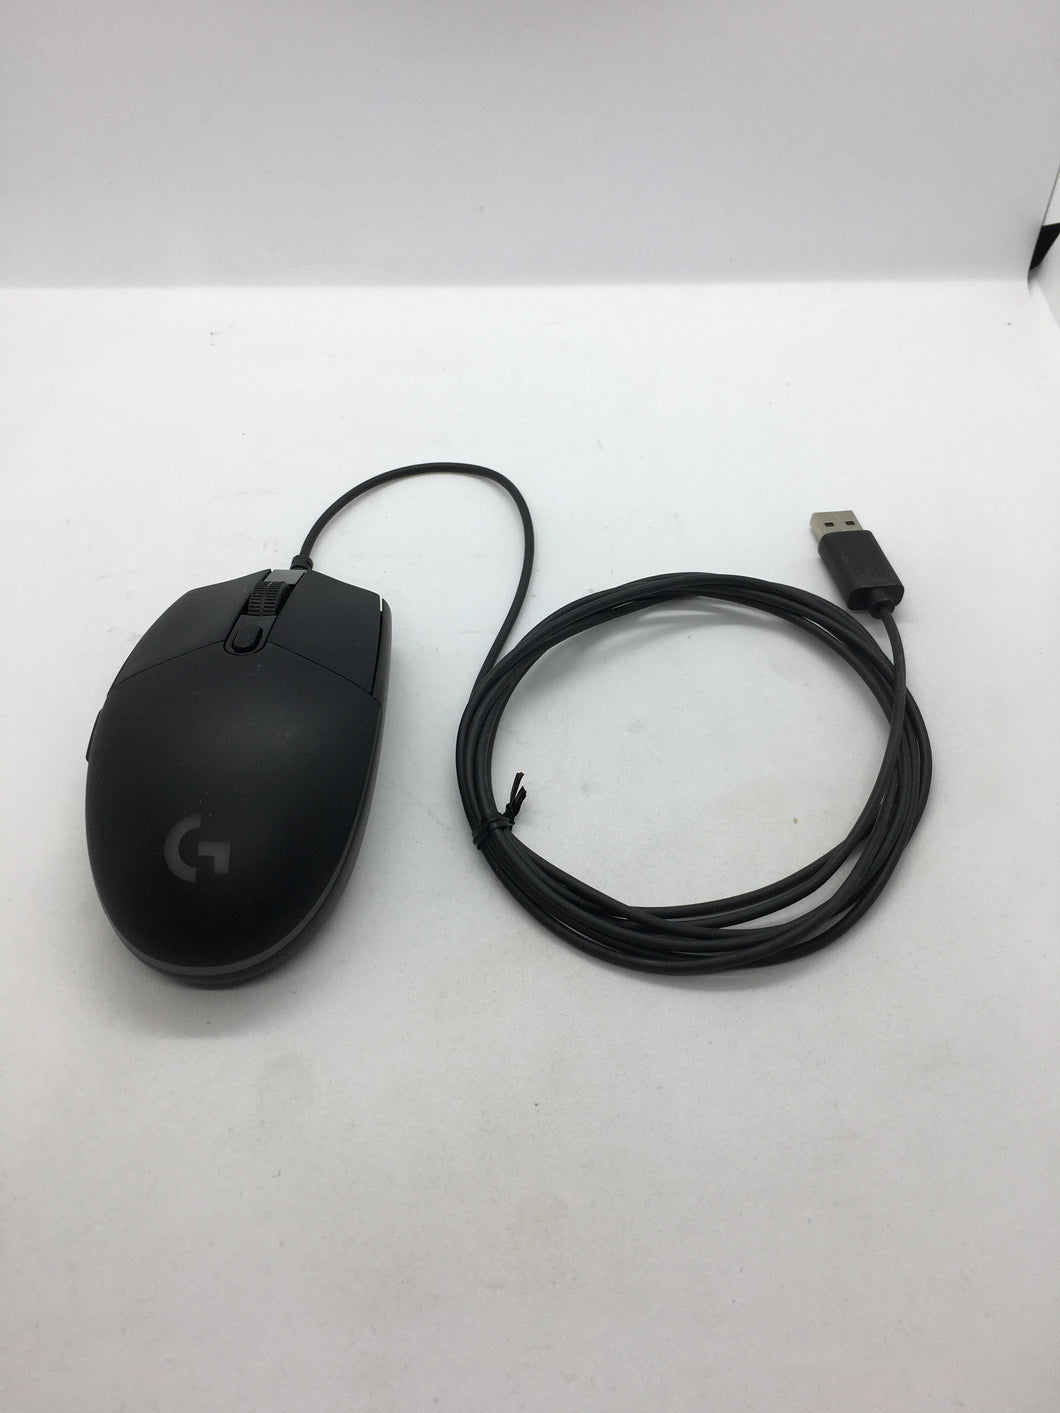 Logitech G203 Gaming Mouse - As New, Not In Original Packaging